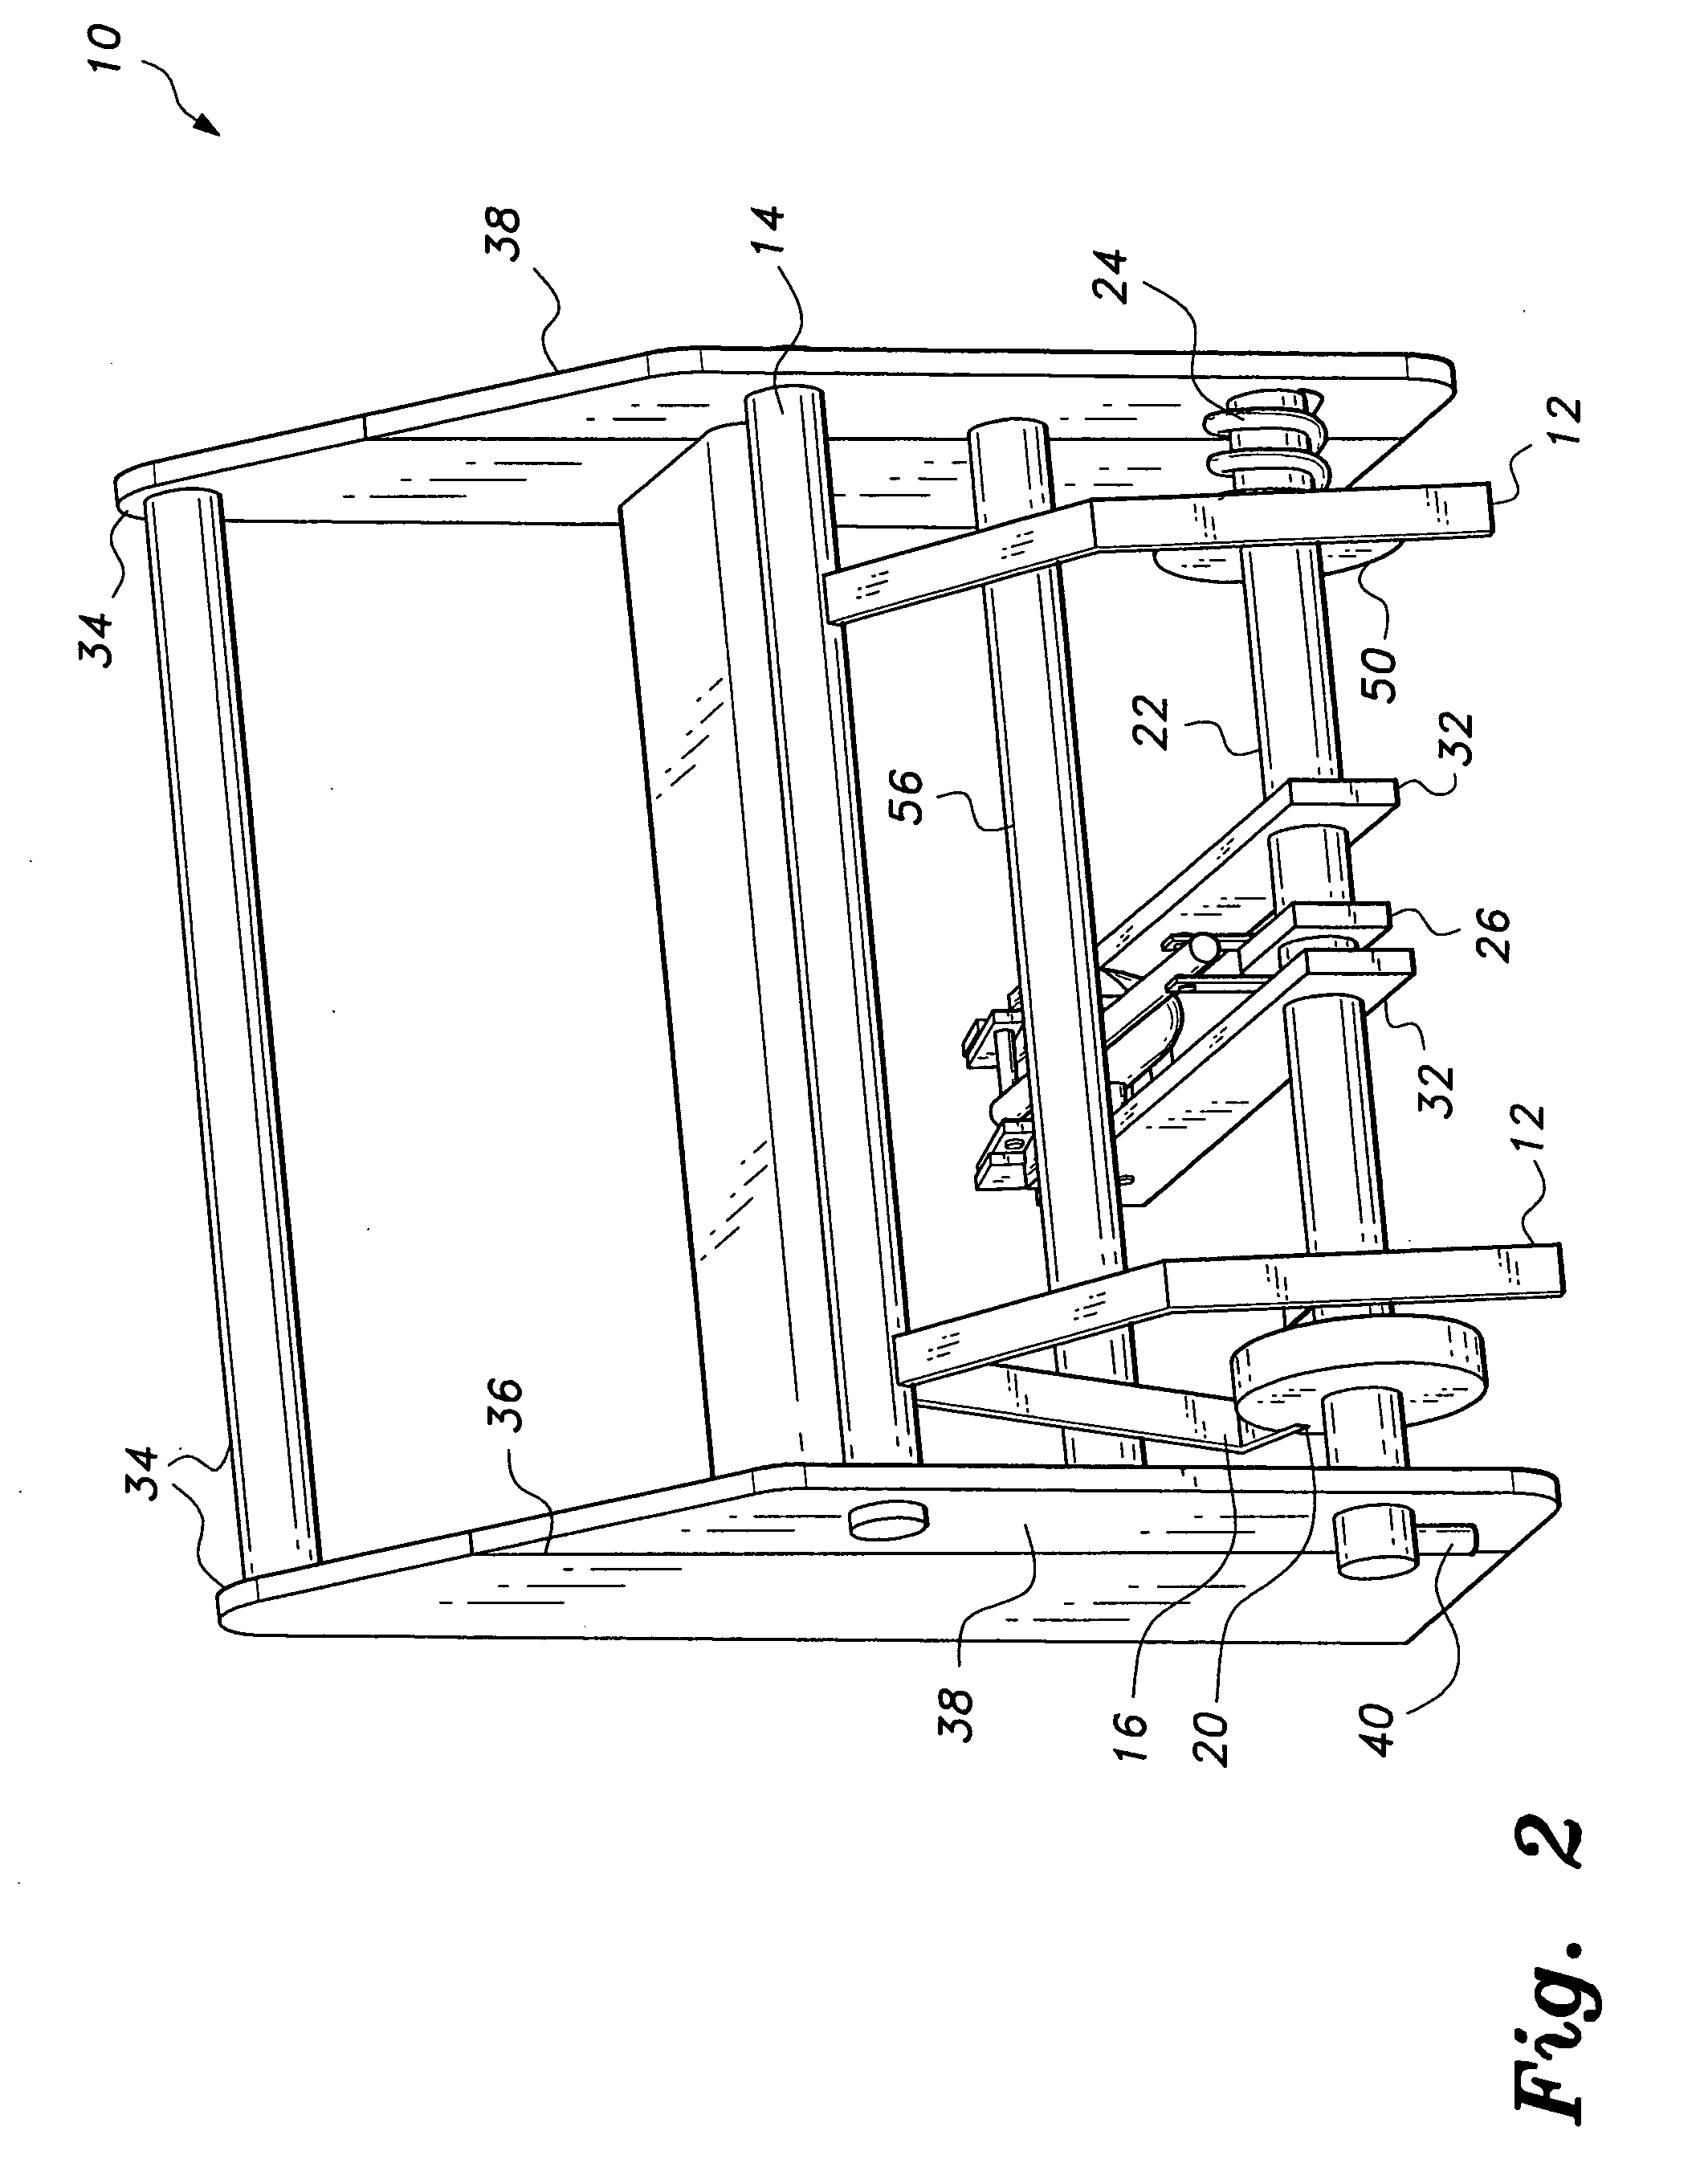 System for capturing a vehicle